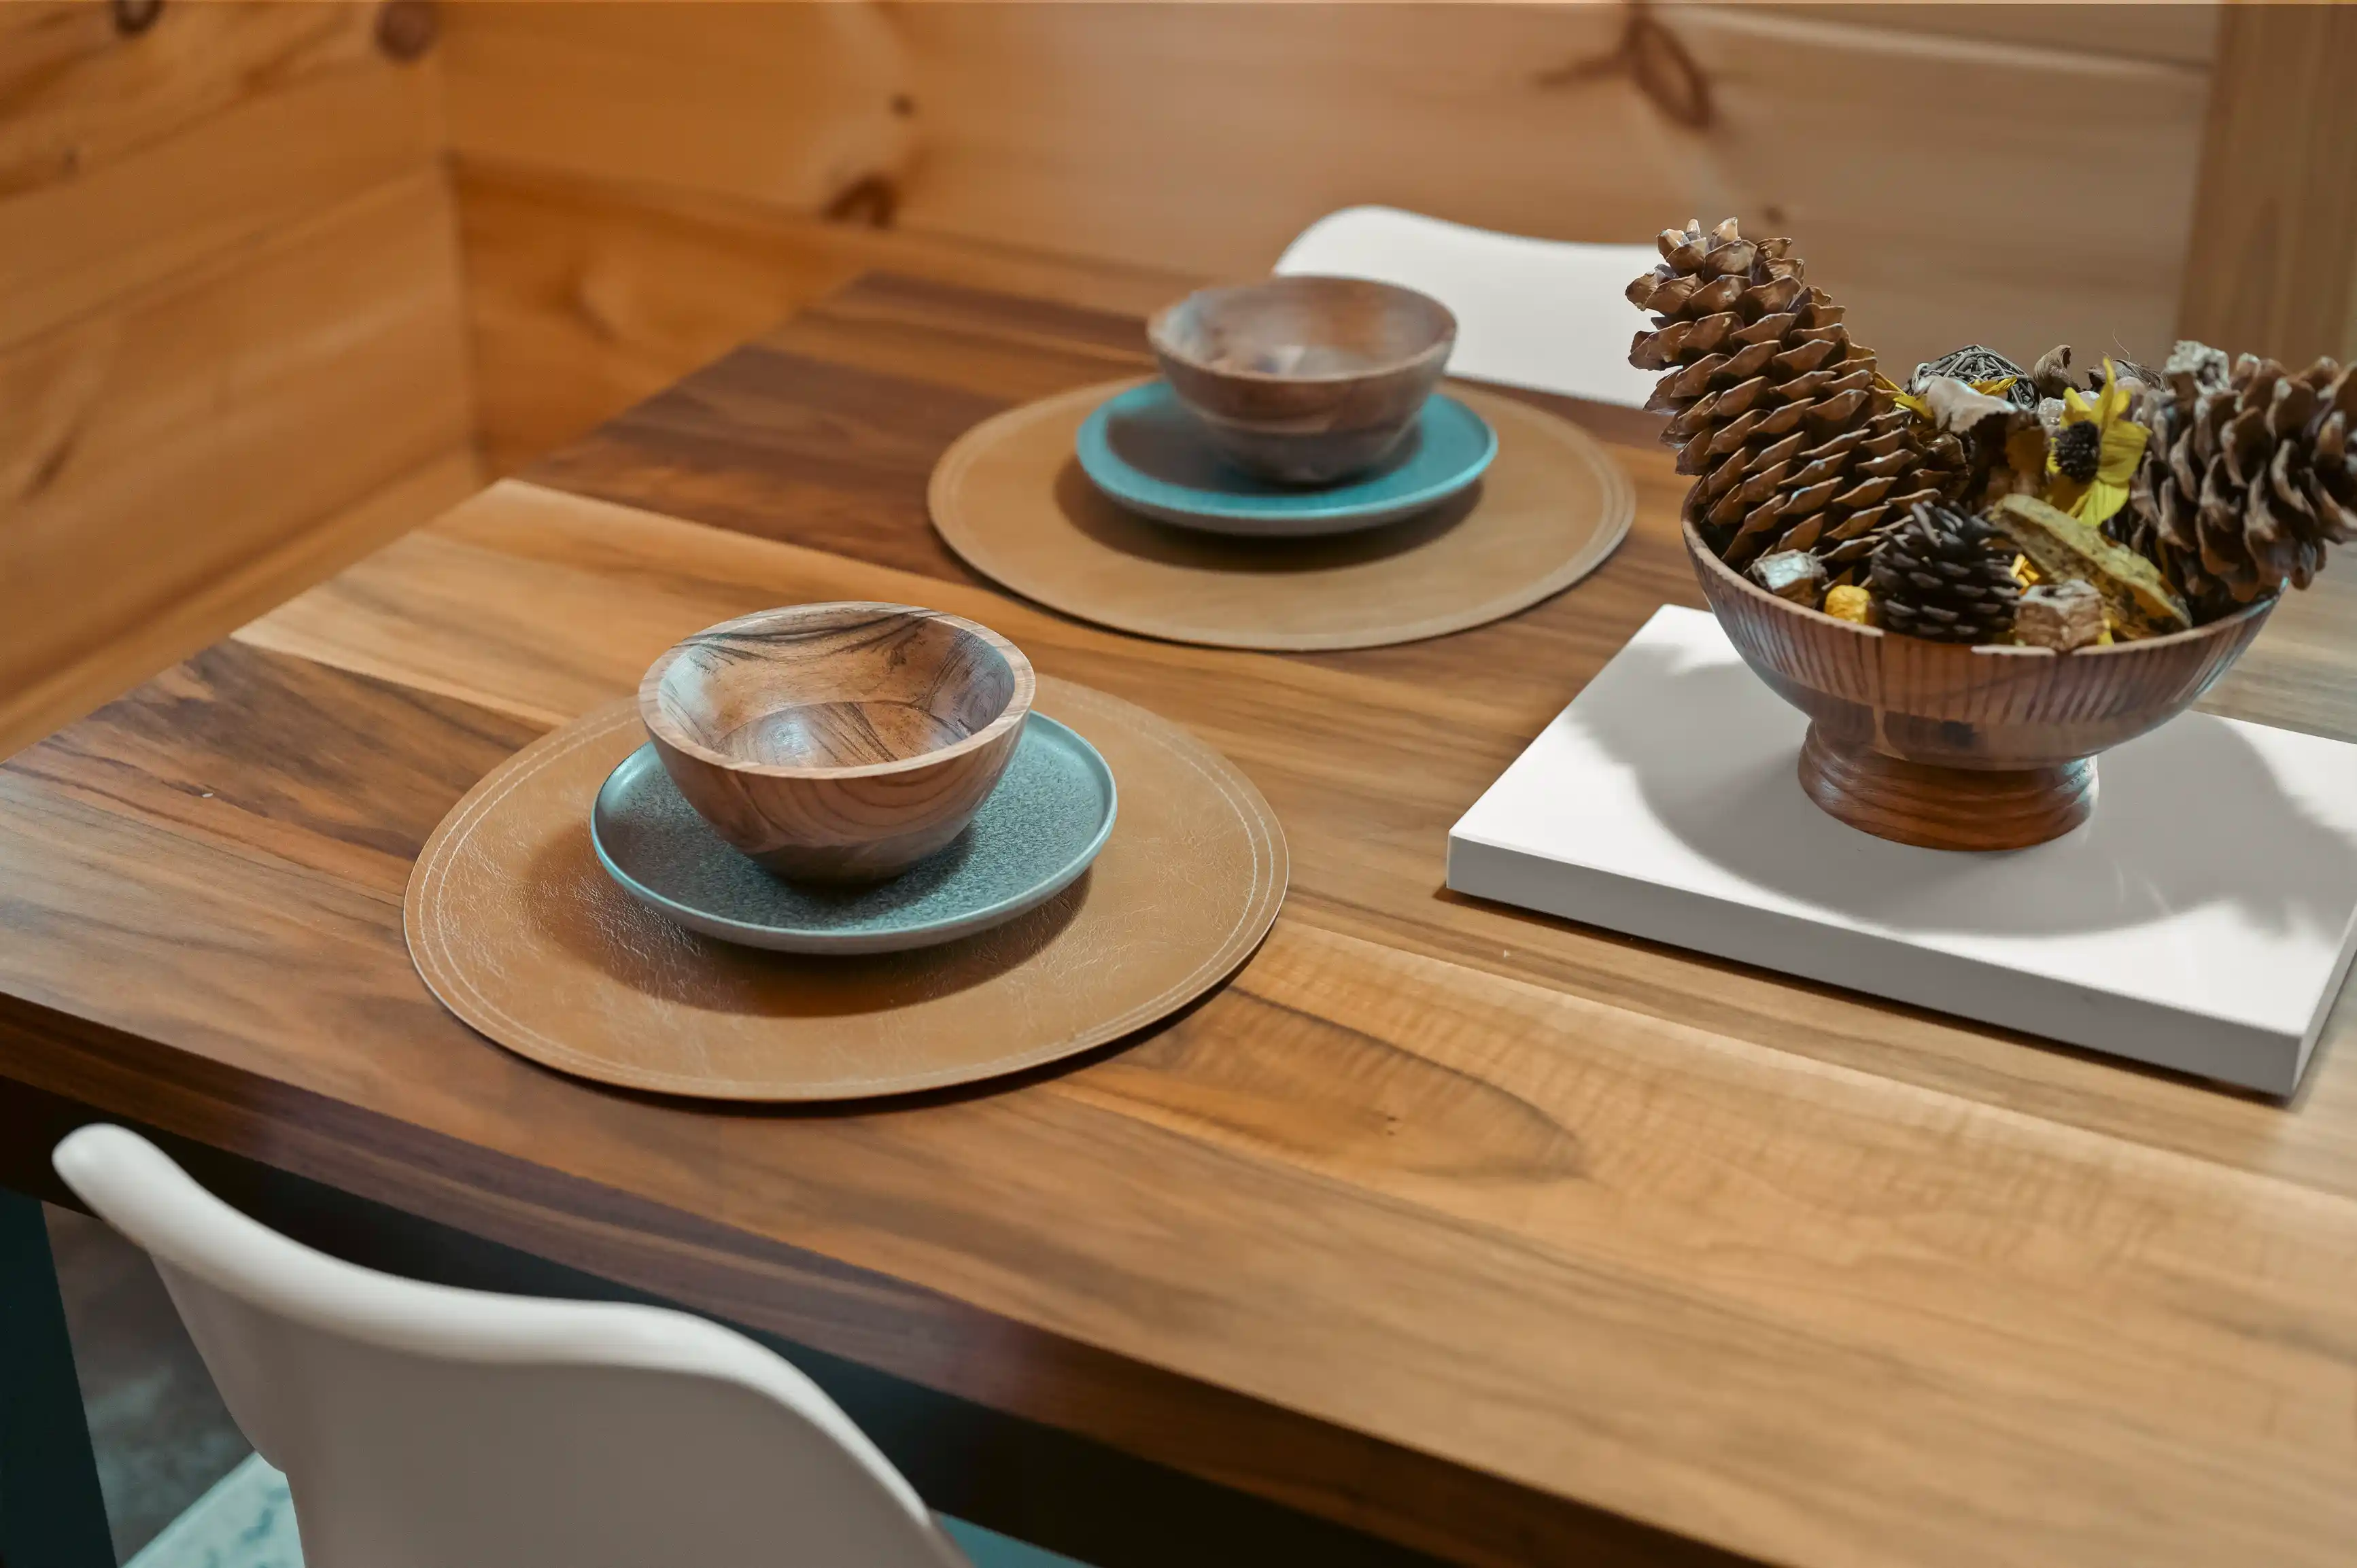 Wooden dining table set with plates, bowls, and a decorative centerpiece containing pine cones.